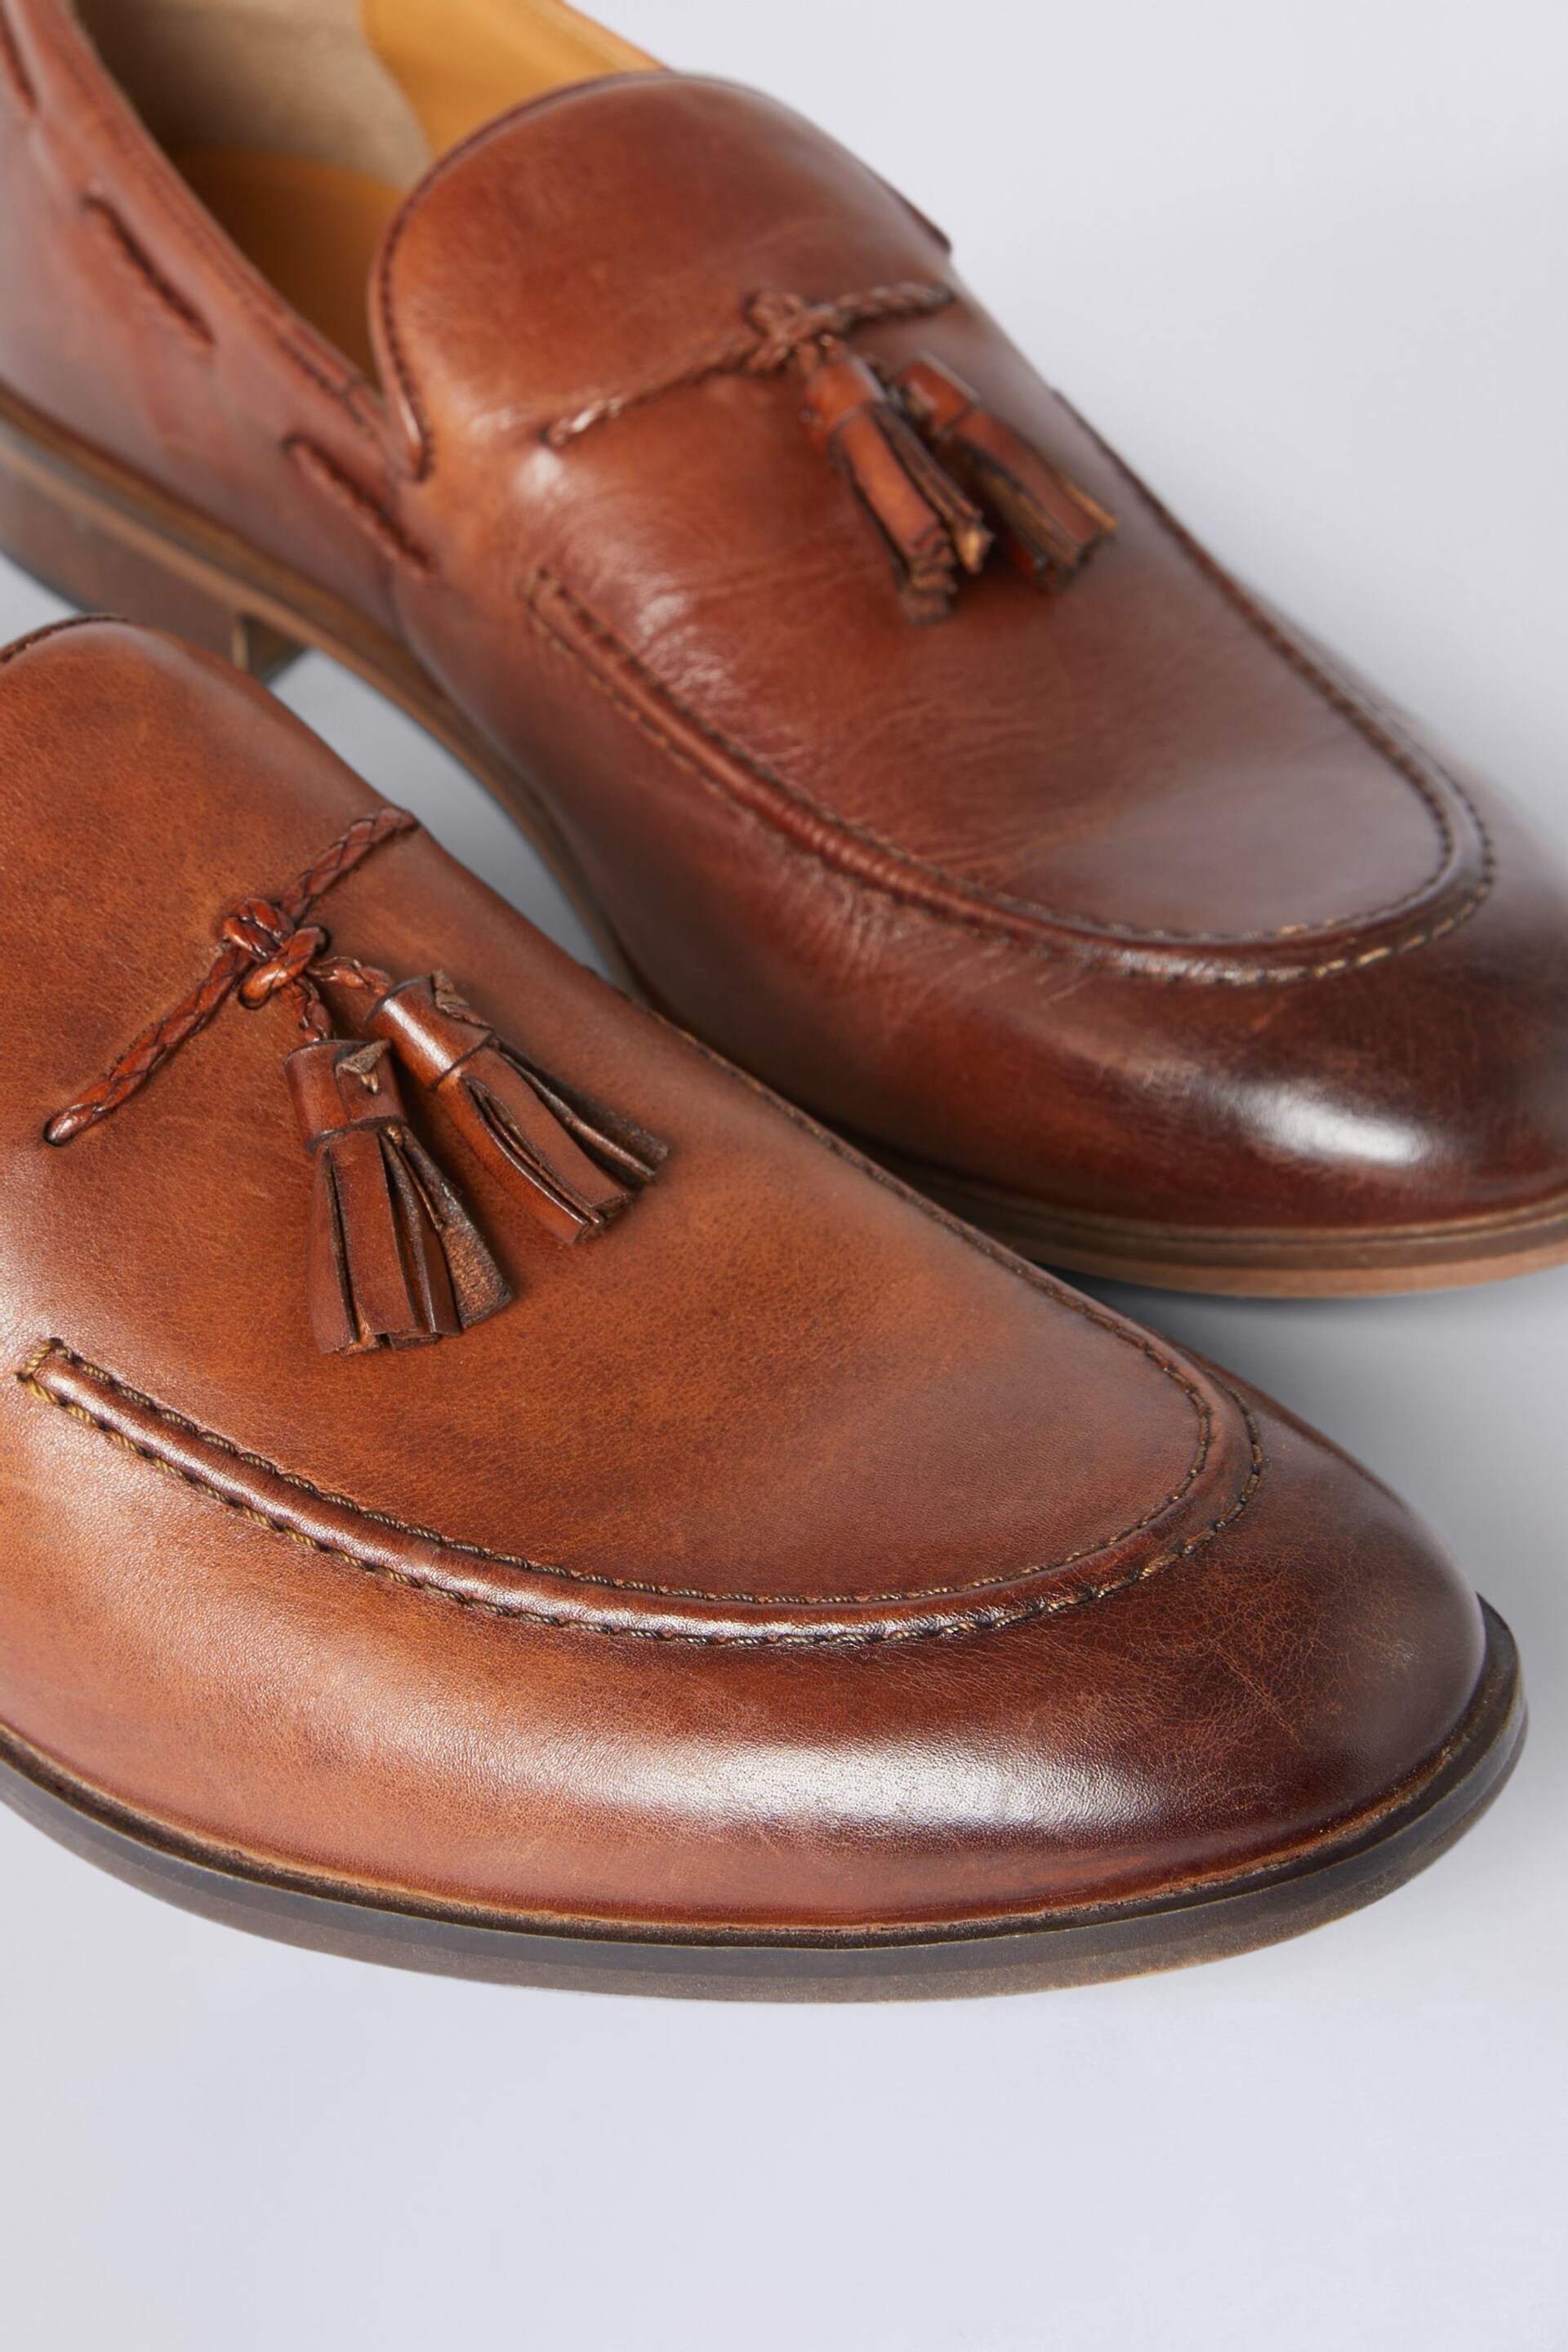 MOSS Brown Highgate Tassel Loafers - Image 4 of 4